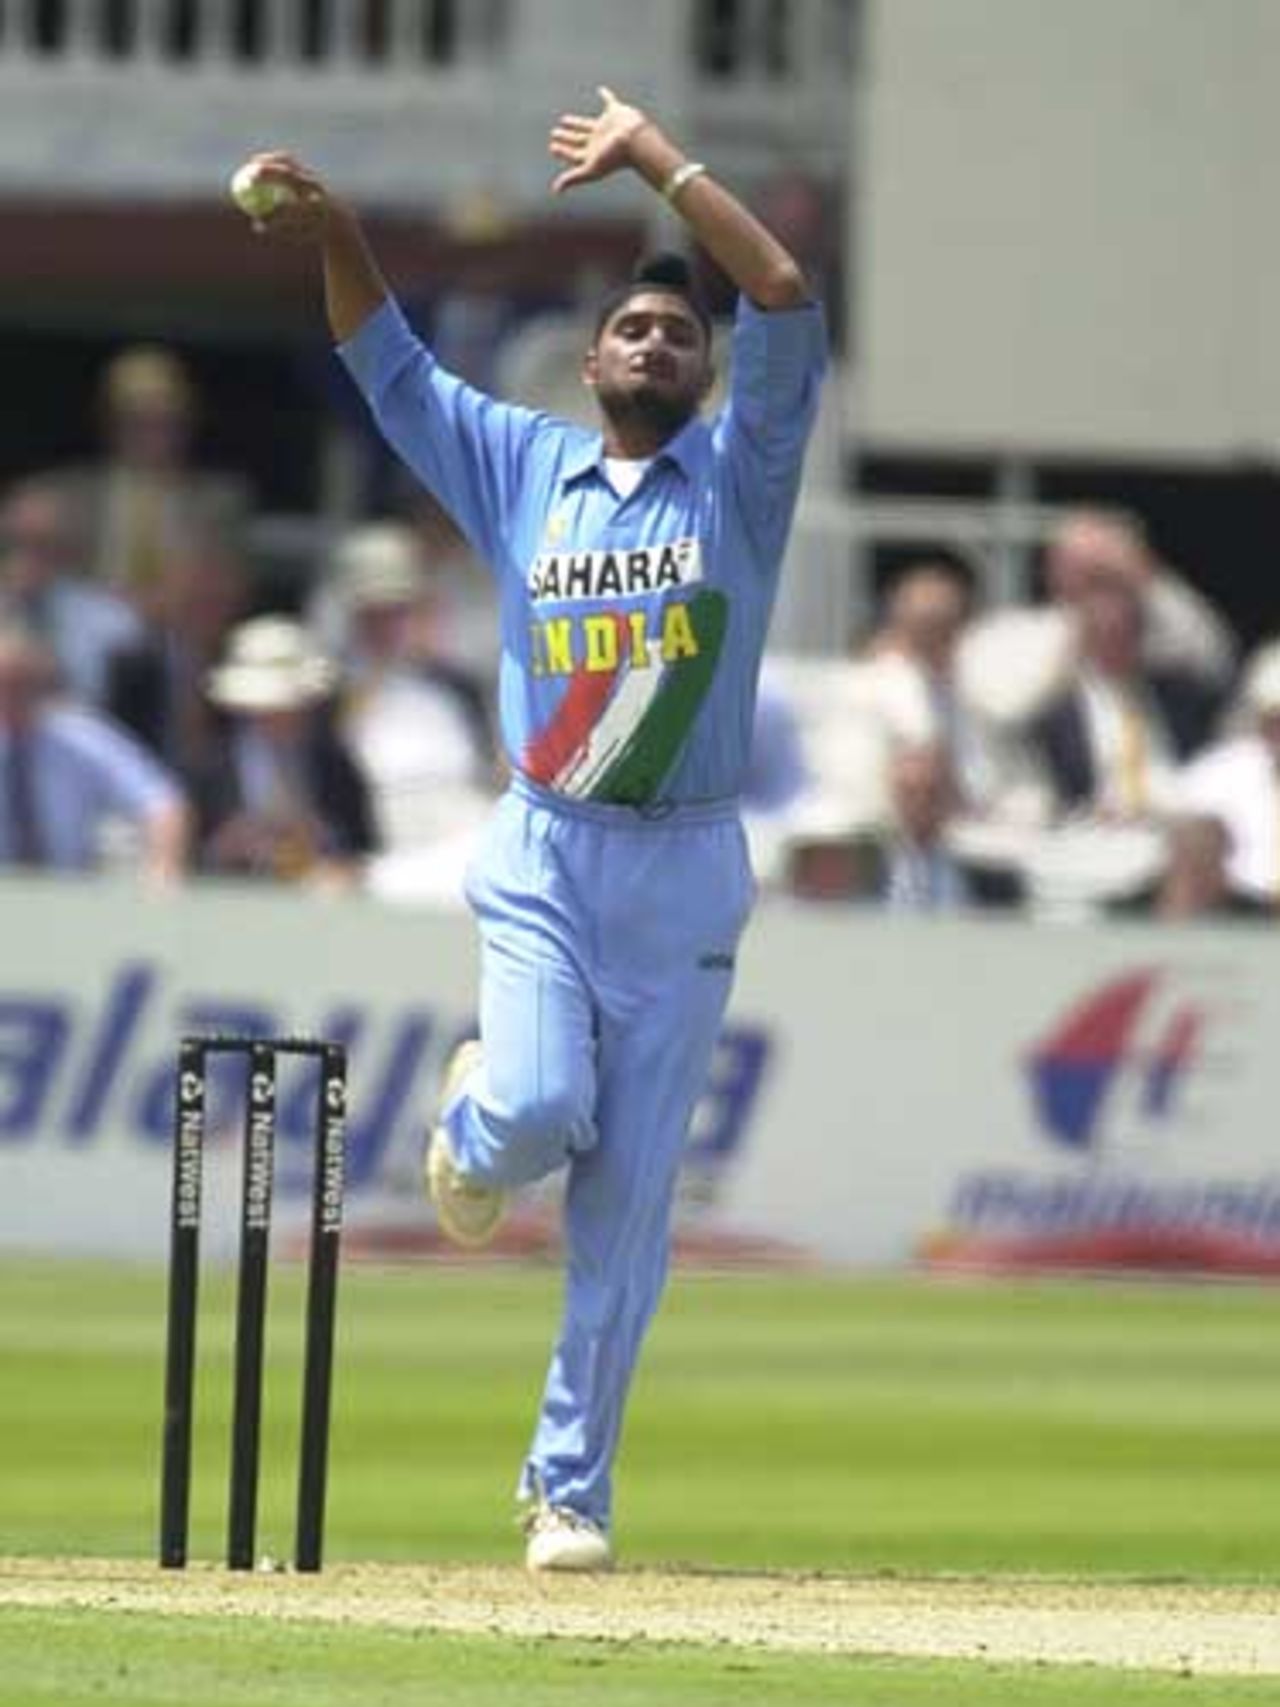 Harbhajan Singh seems to float up to the wicket, England v India, NatWest Series, Lord's, Sat 29 Jun